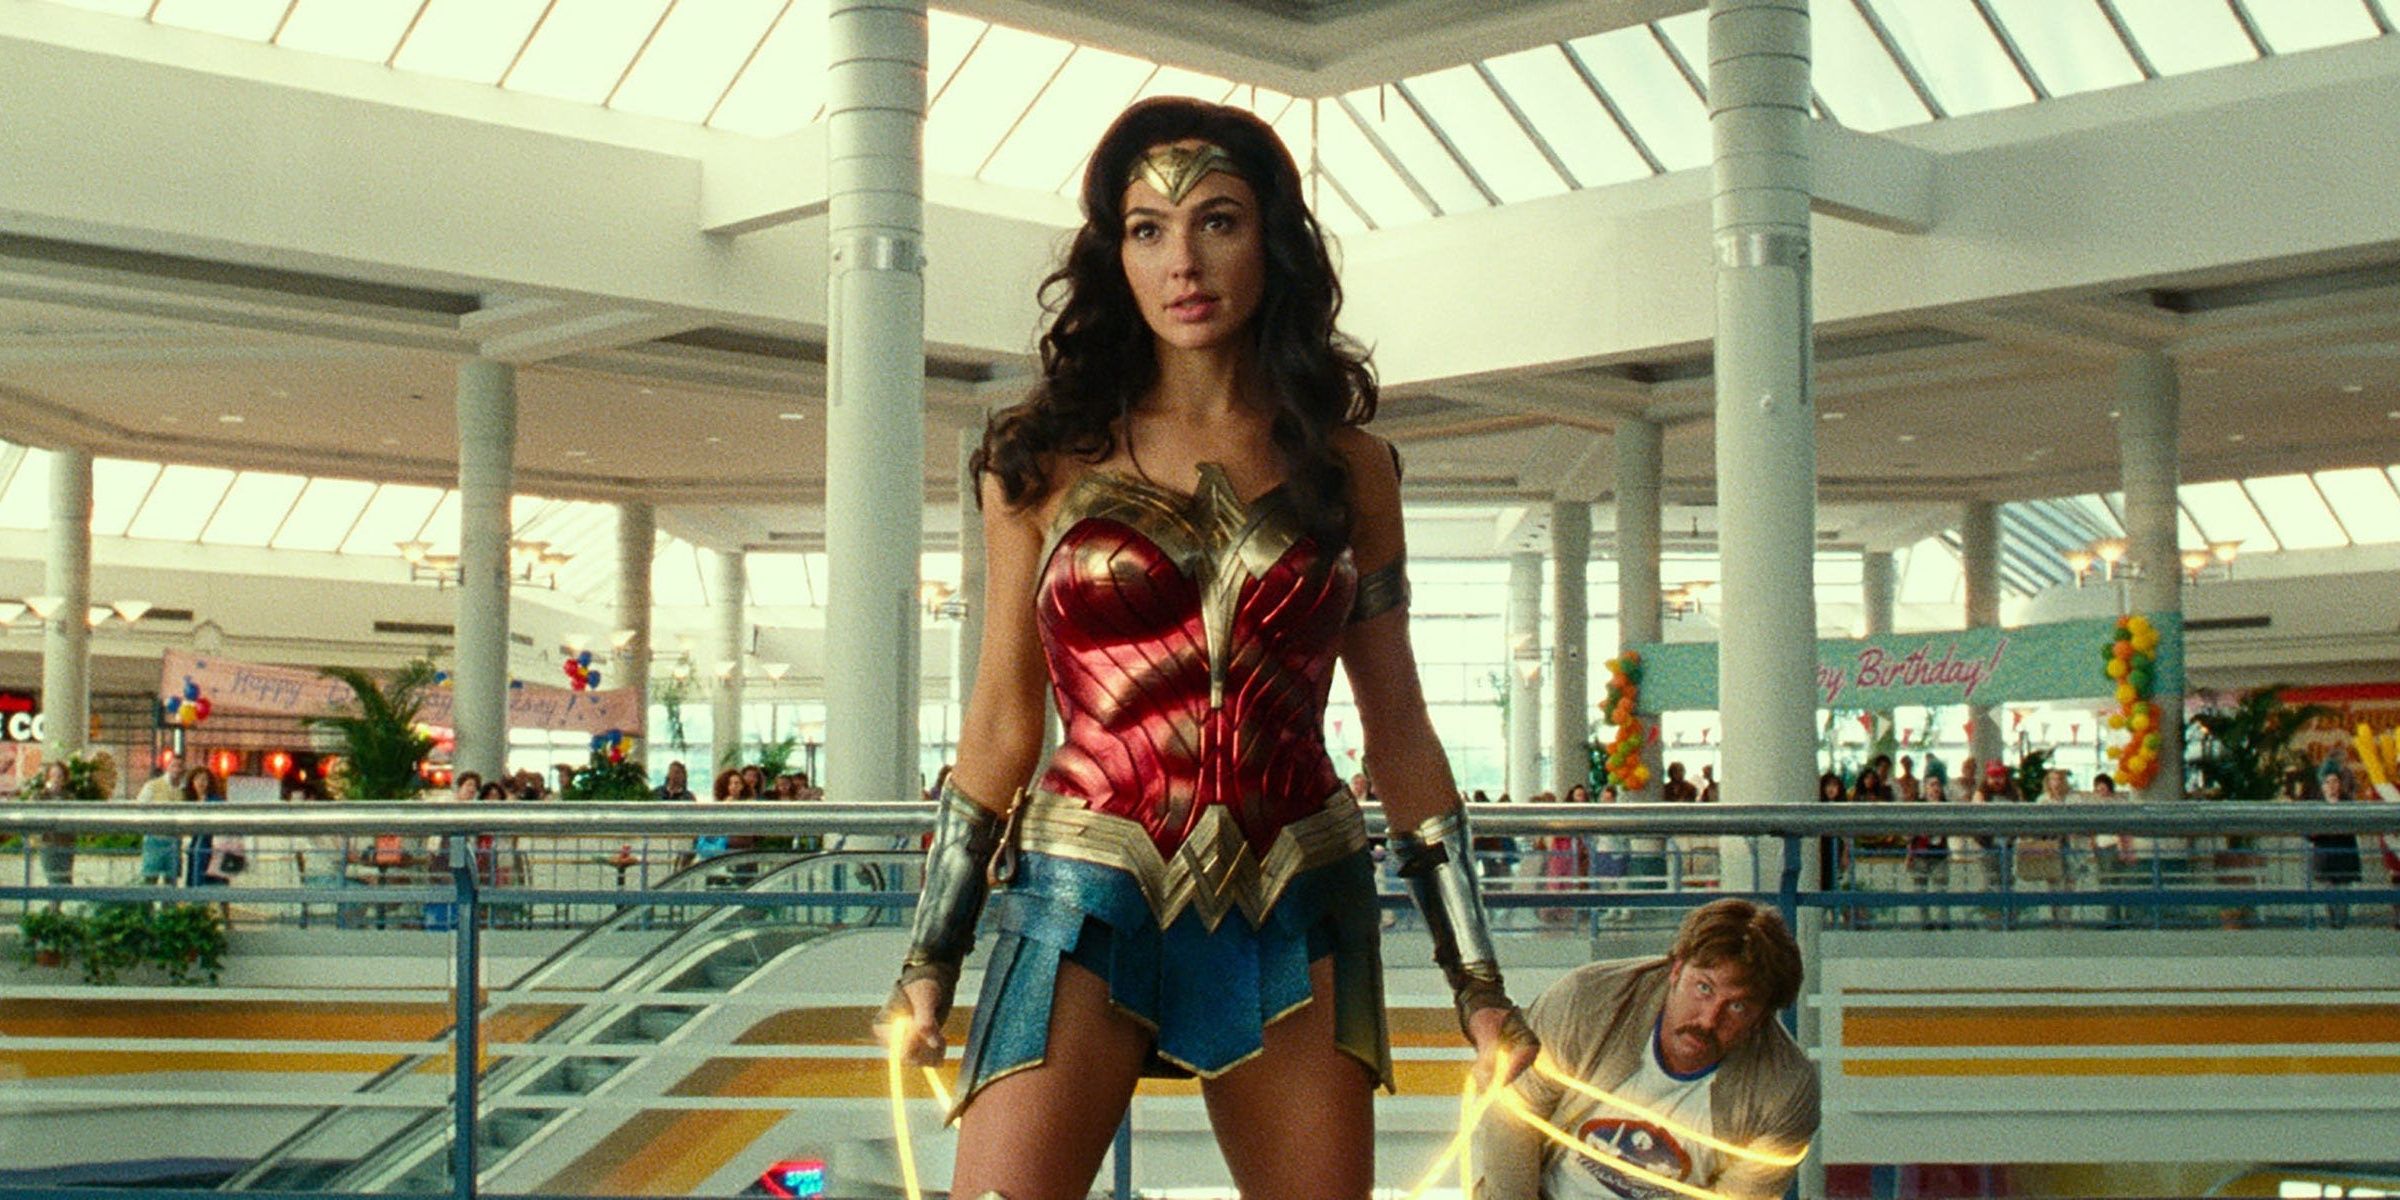 Wonder Woman fighting robbers in the mall in Wonder Woman 1984